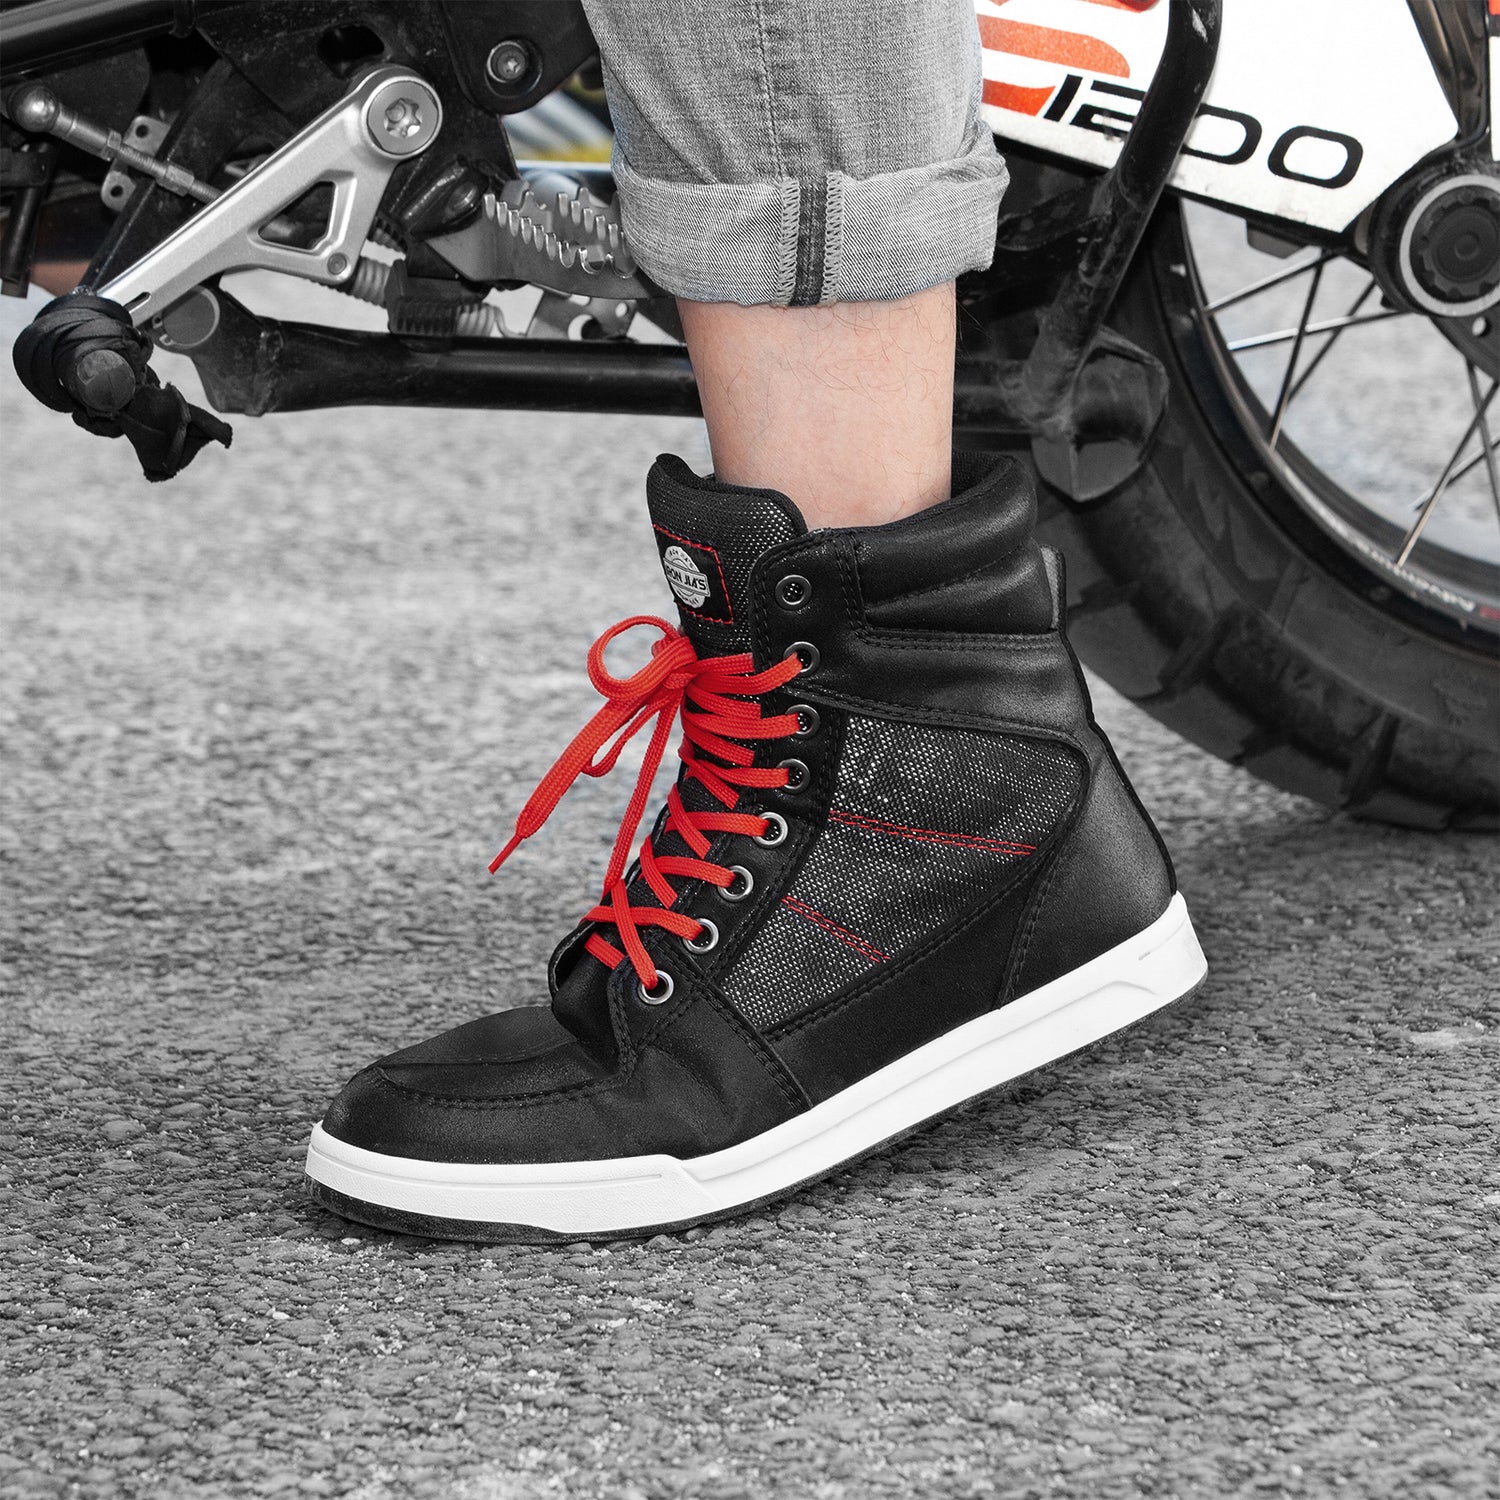 IRONJIAS Black Protective Breathable Motorcycle Shoes | XZ001